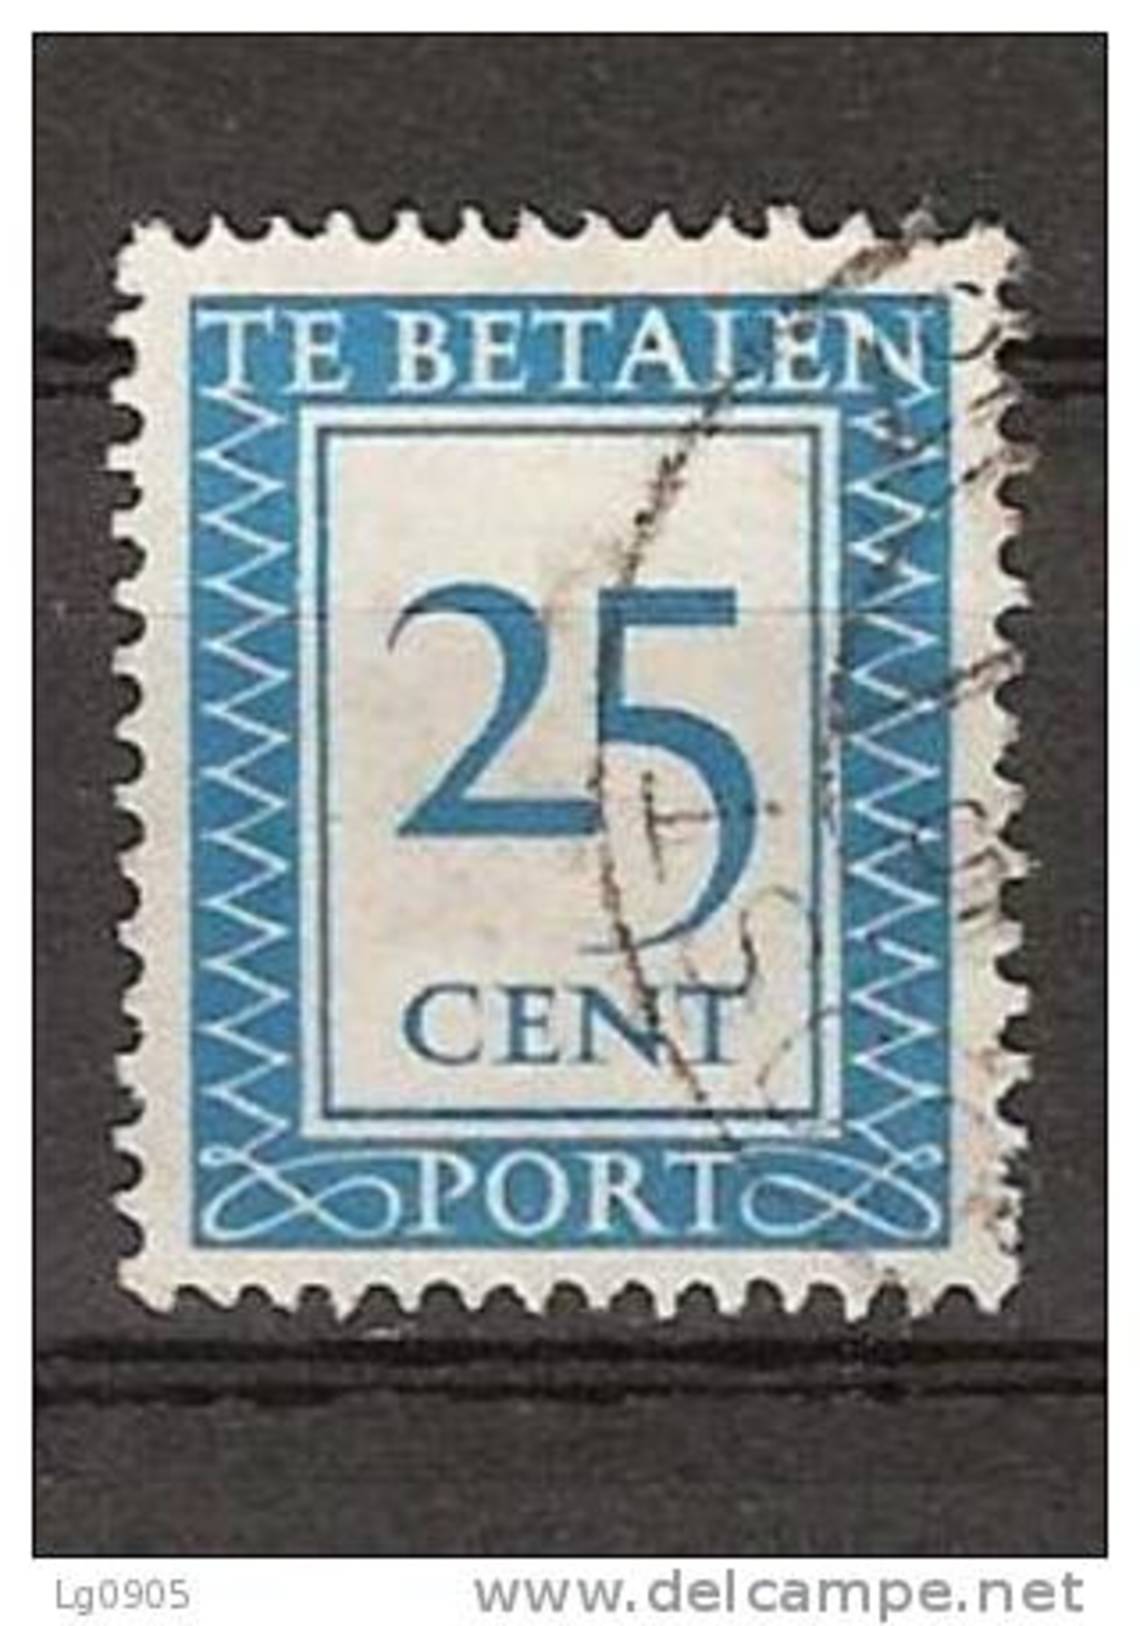 Nederland Netherlands Holanda Pays Bas Port 95 Used Port, Timbre-taxe, Postmarke, Sellos De Correos NOW MANY DUE STAMPS - Impuestos